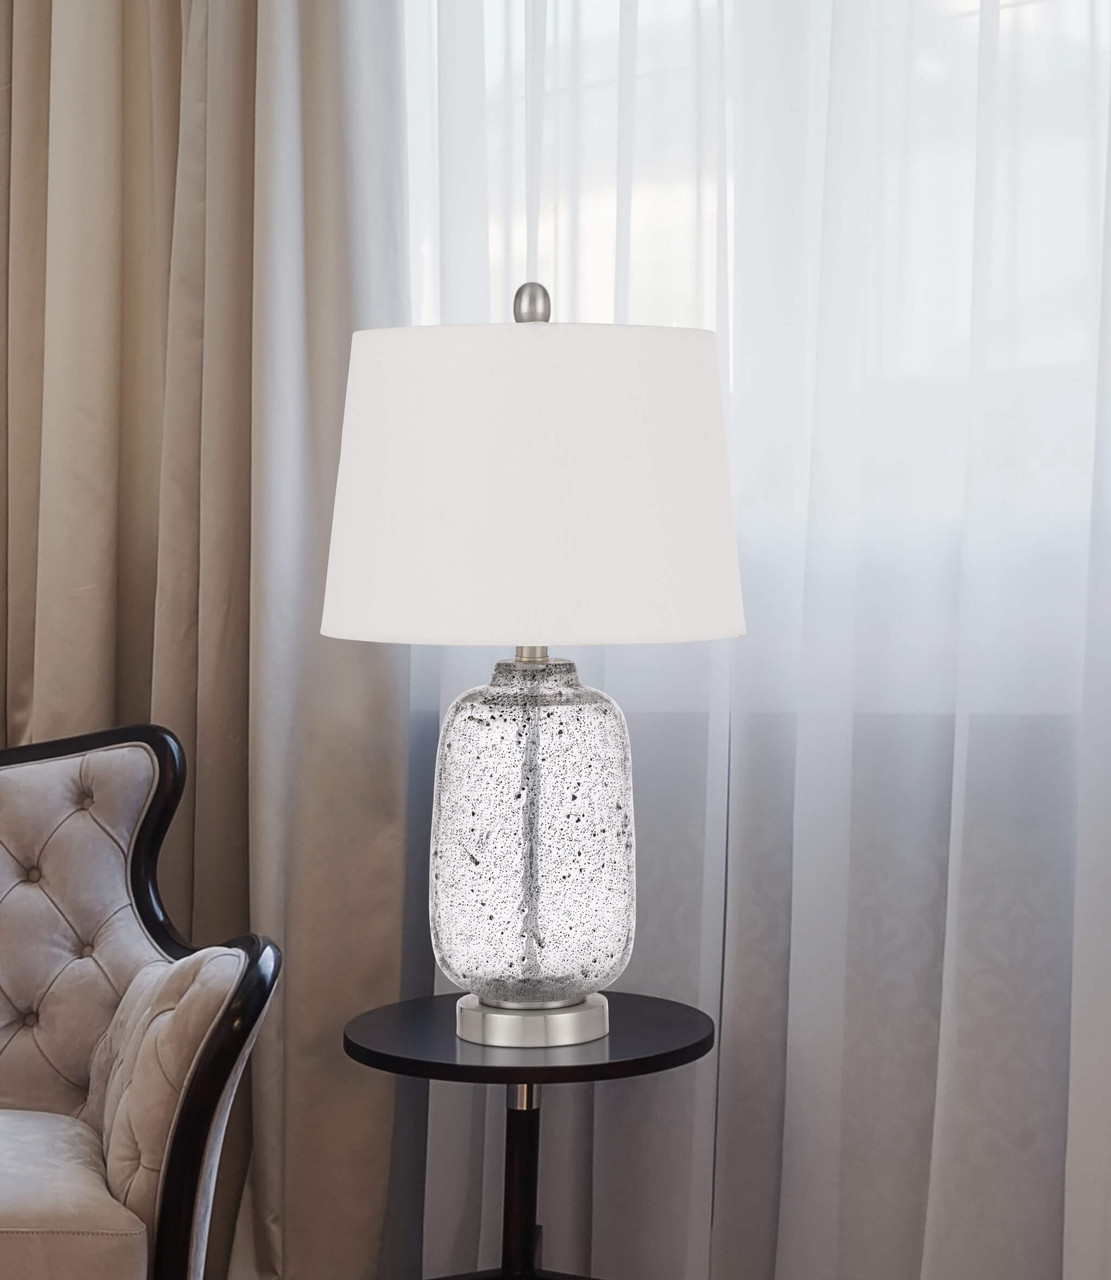 24" Nickel Metal Table Lamp With White Empire Shade - Chicken Pieces